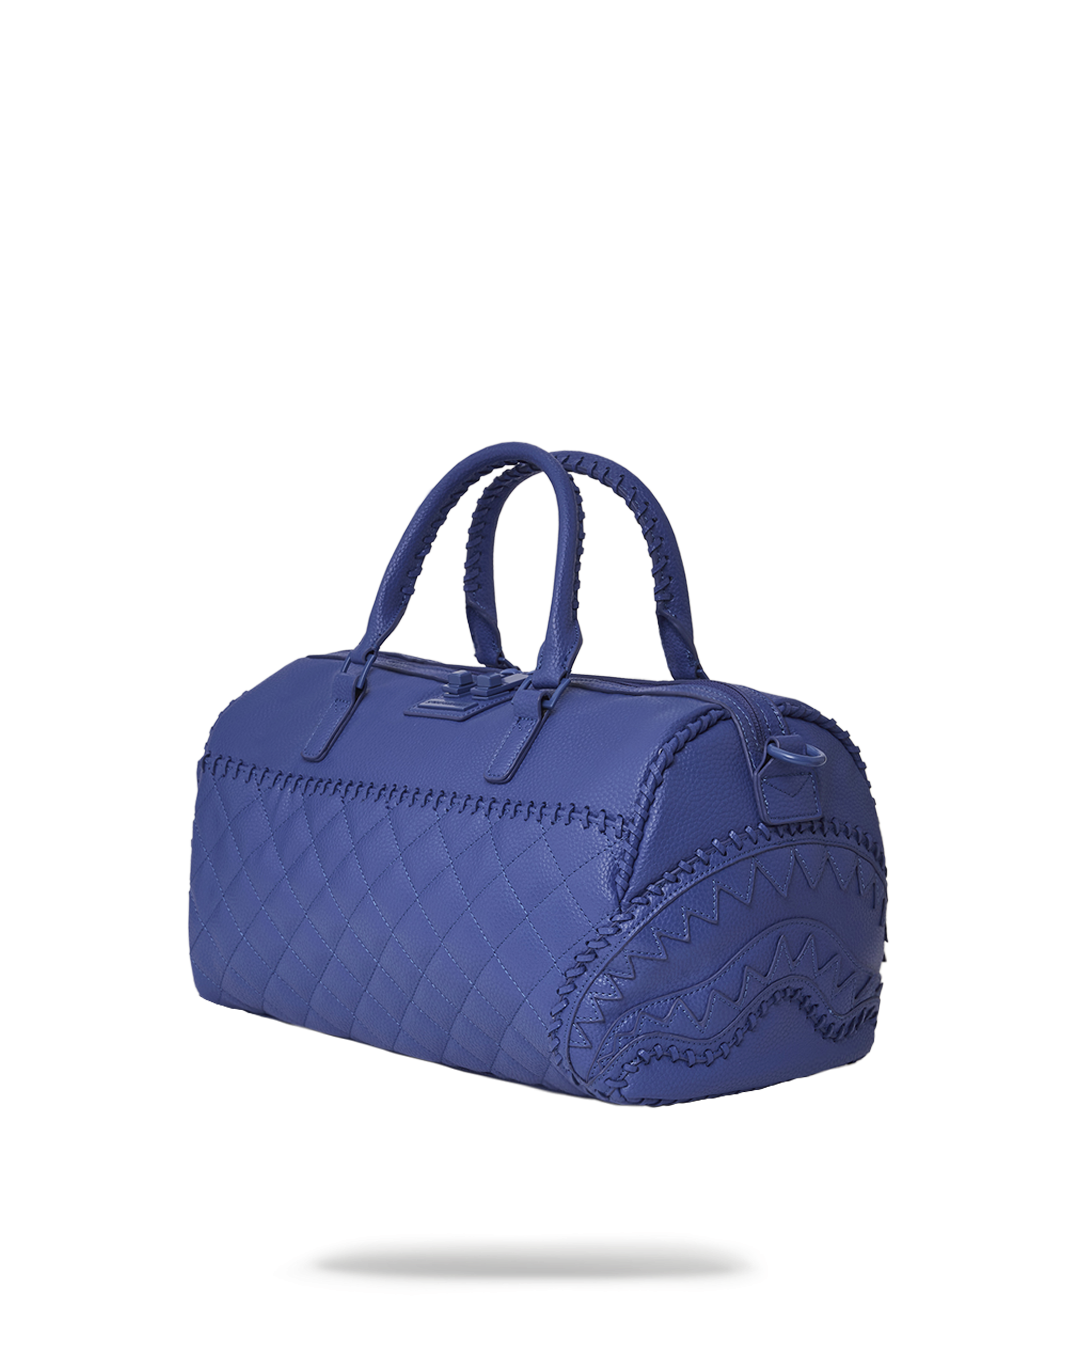 DKNY CLOSEOUT! Allure Quilted Barrel Large Duffel, Created for Macy's -  Macy's